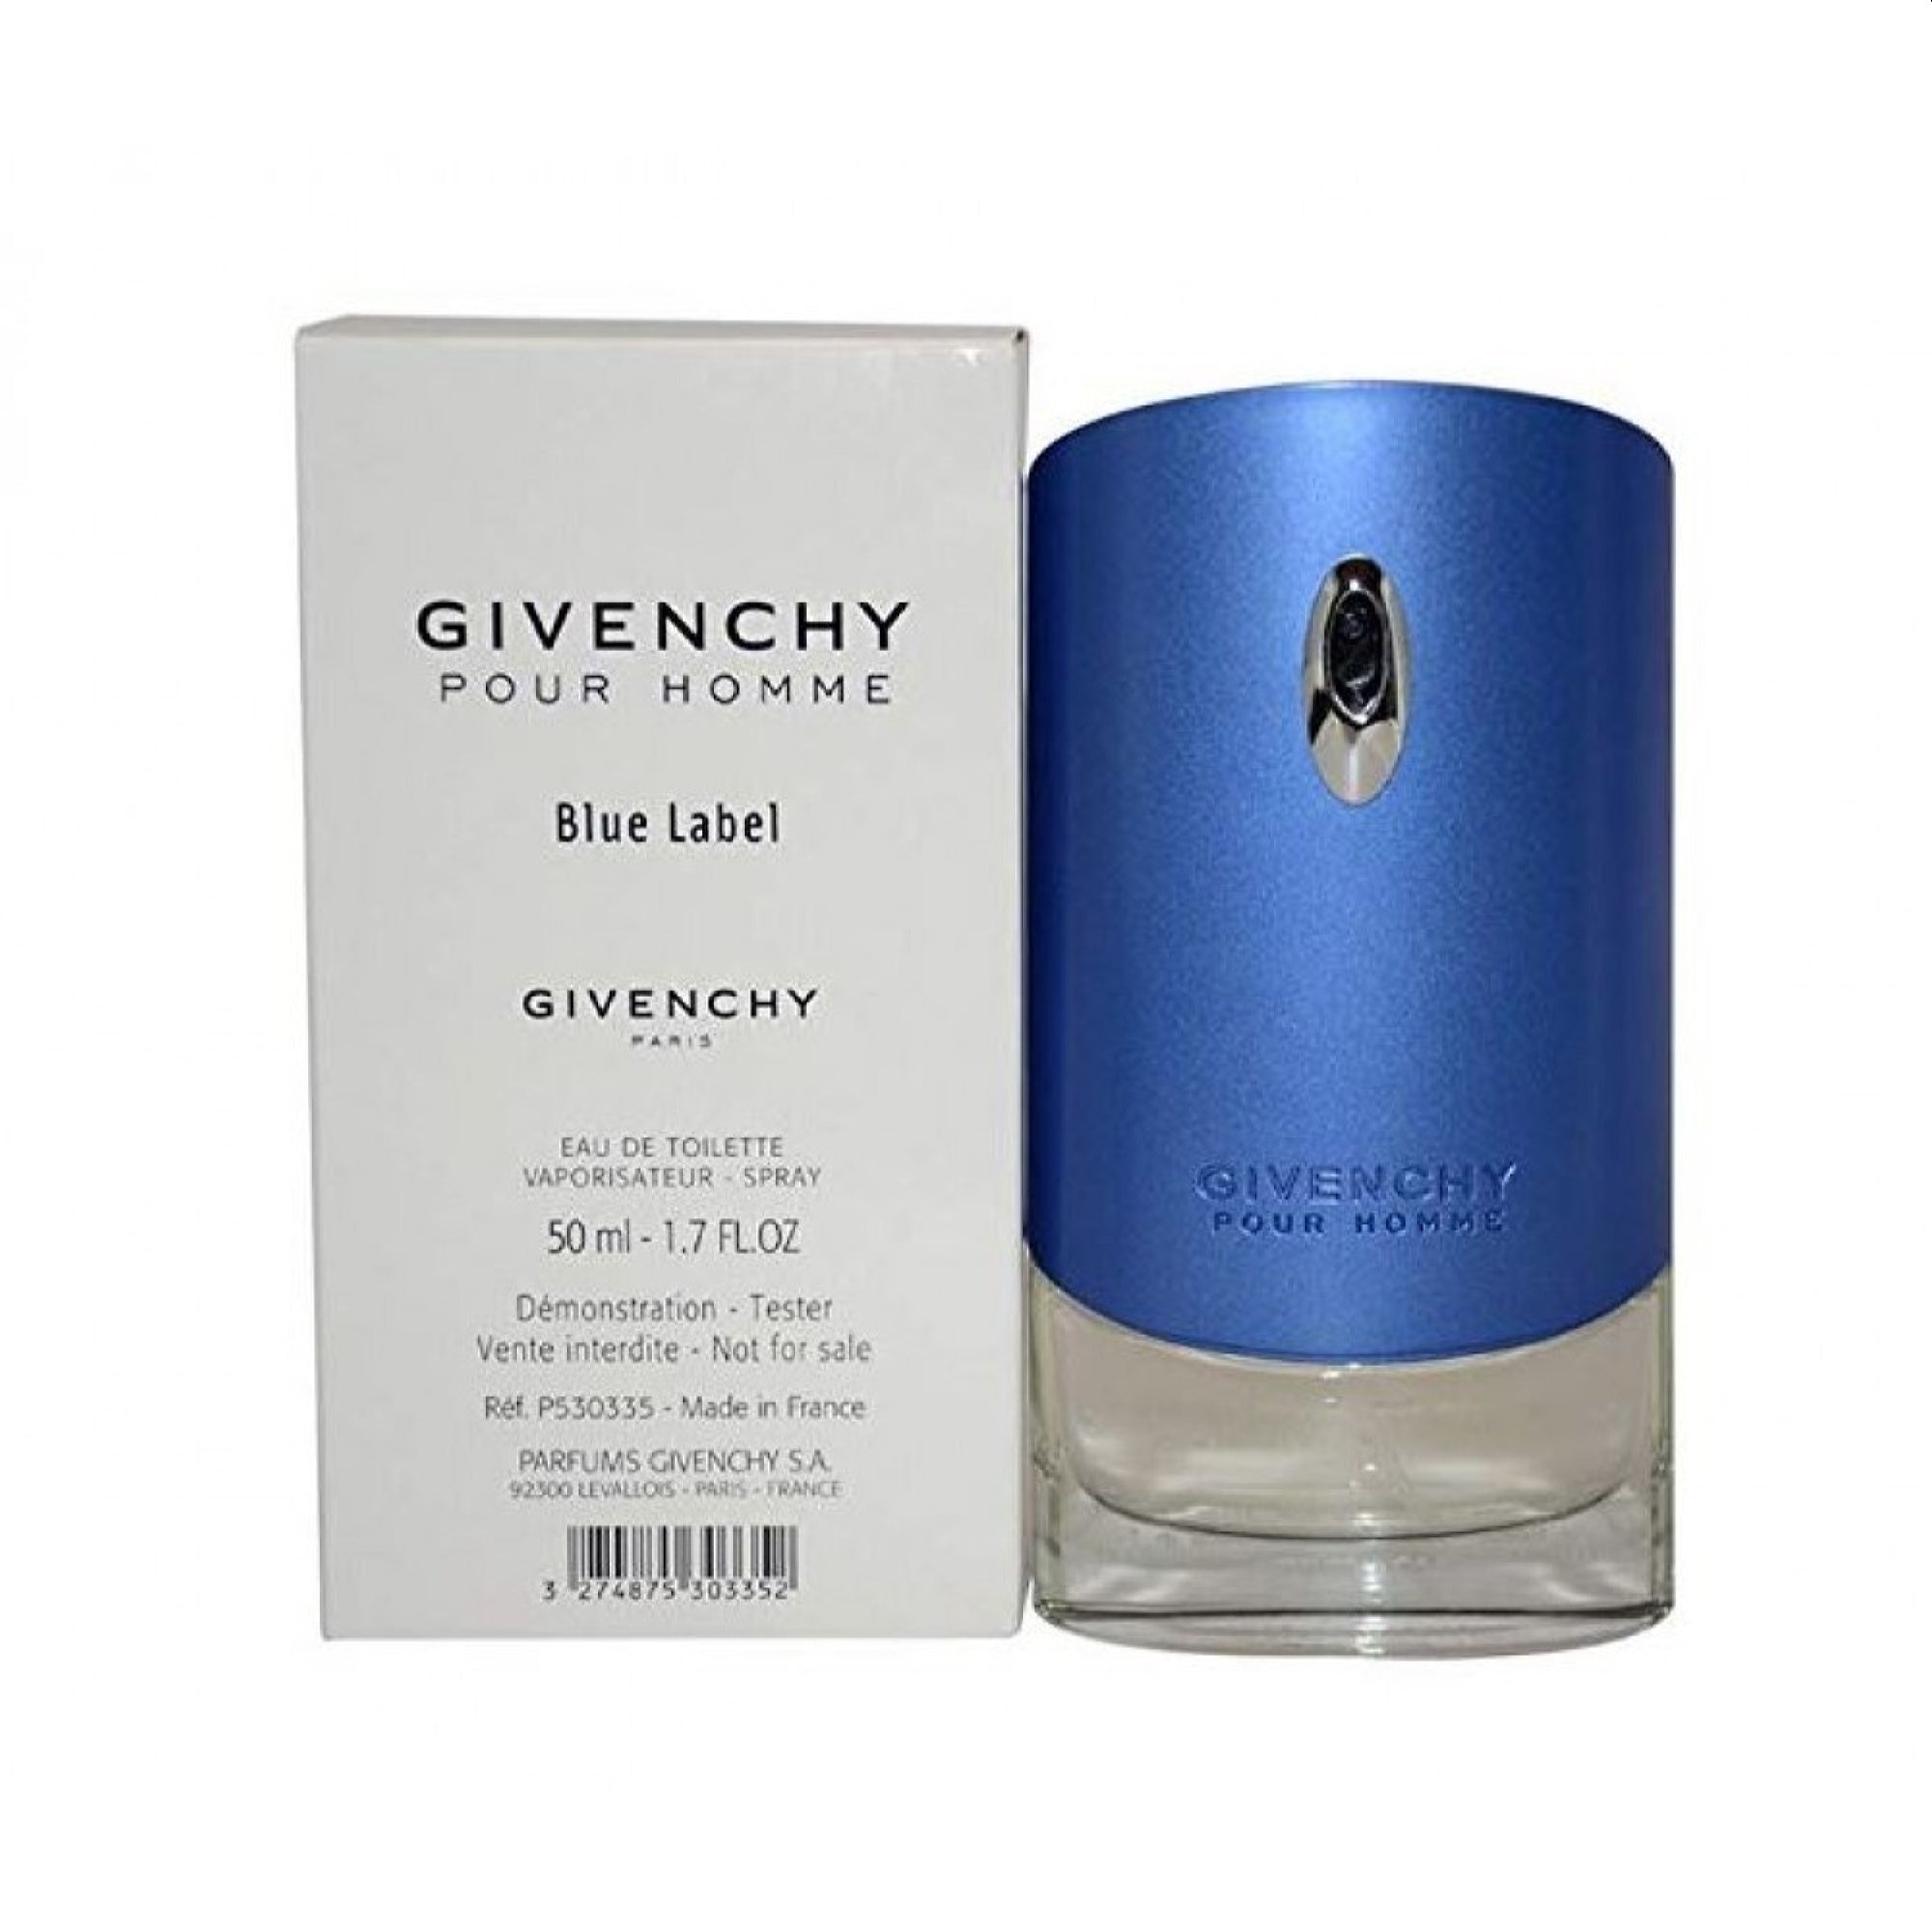 Into The Blue by Givenchy for Women EDT Spray 1.7 Oz